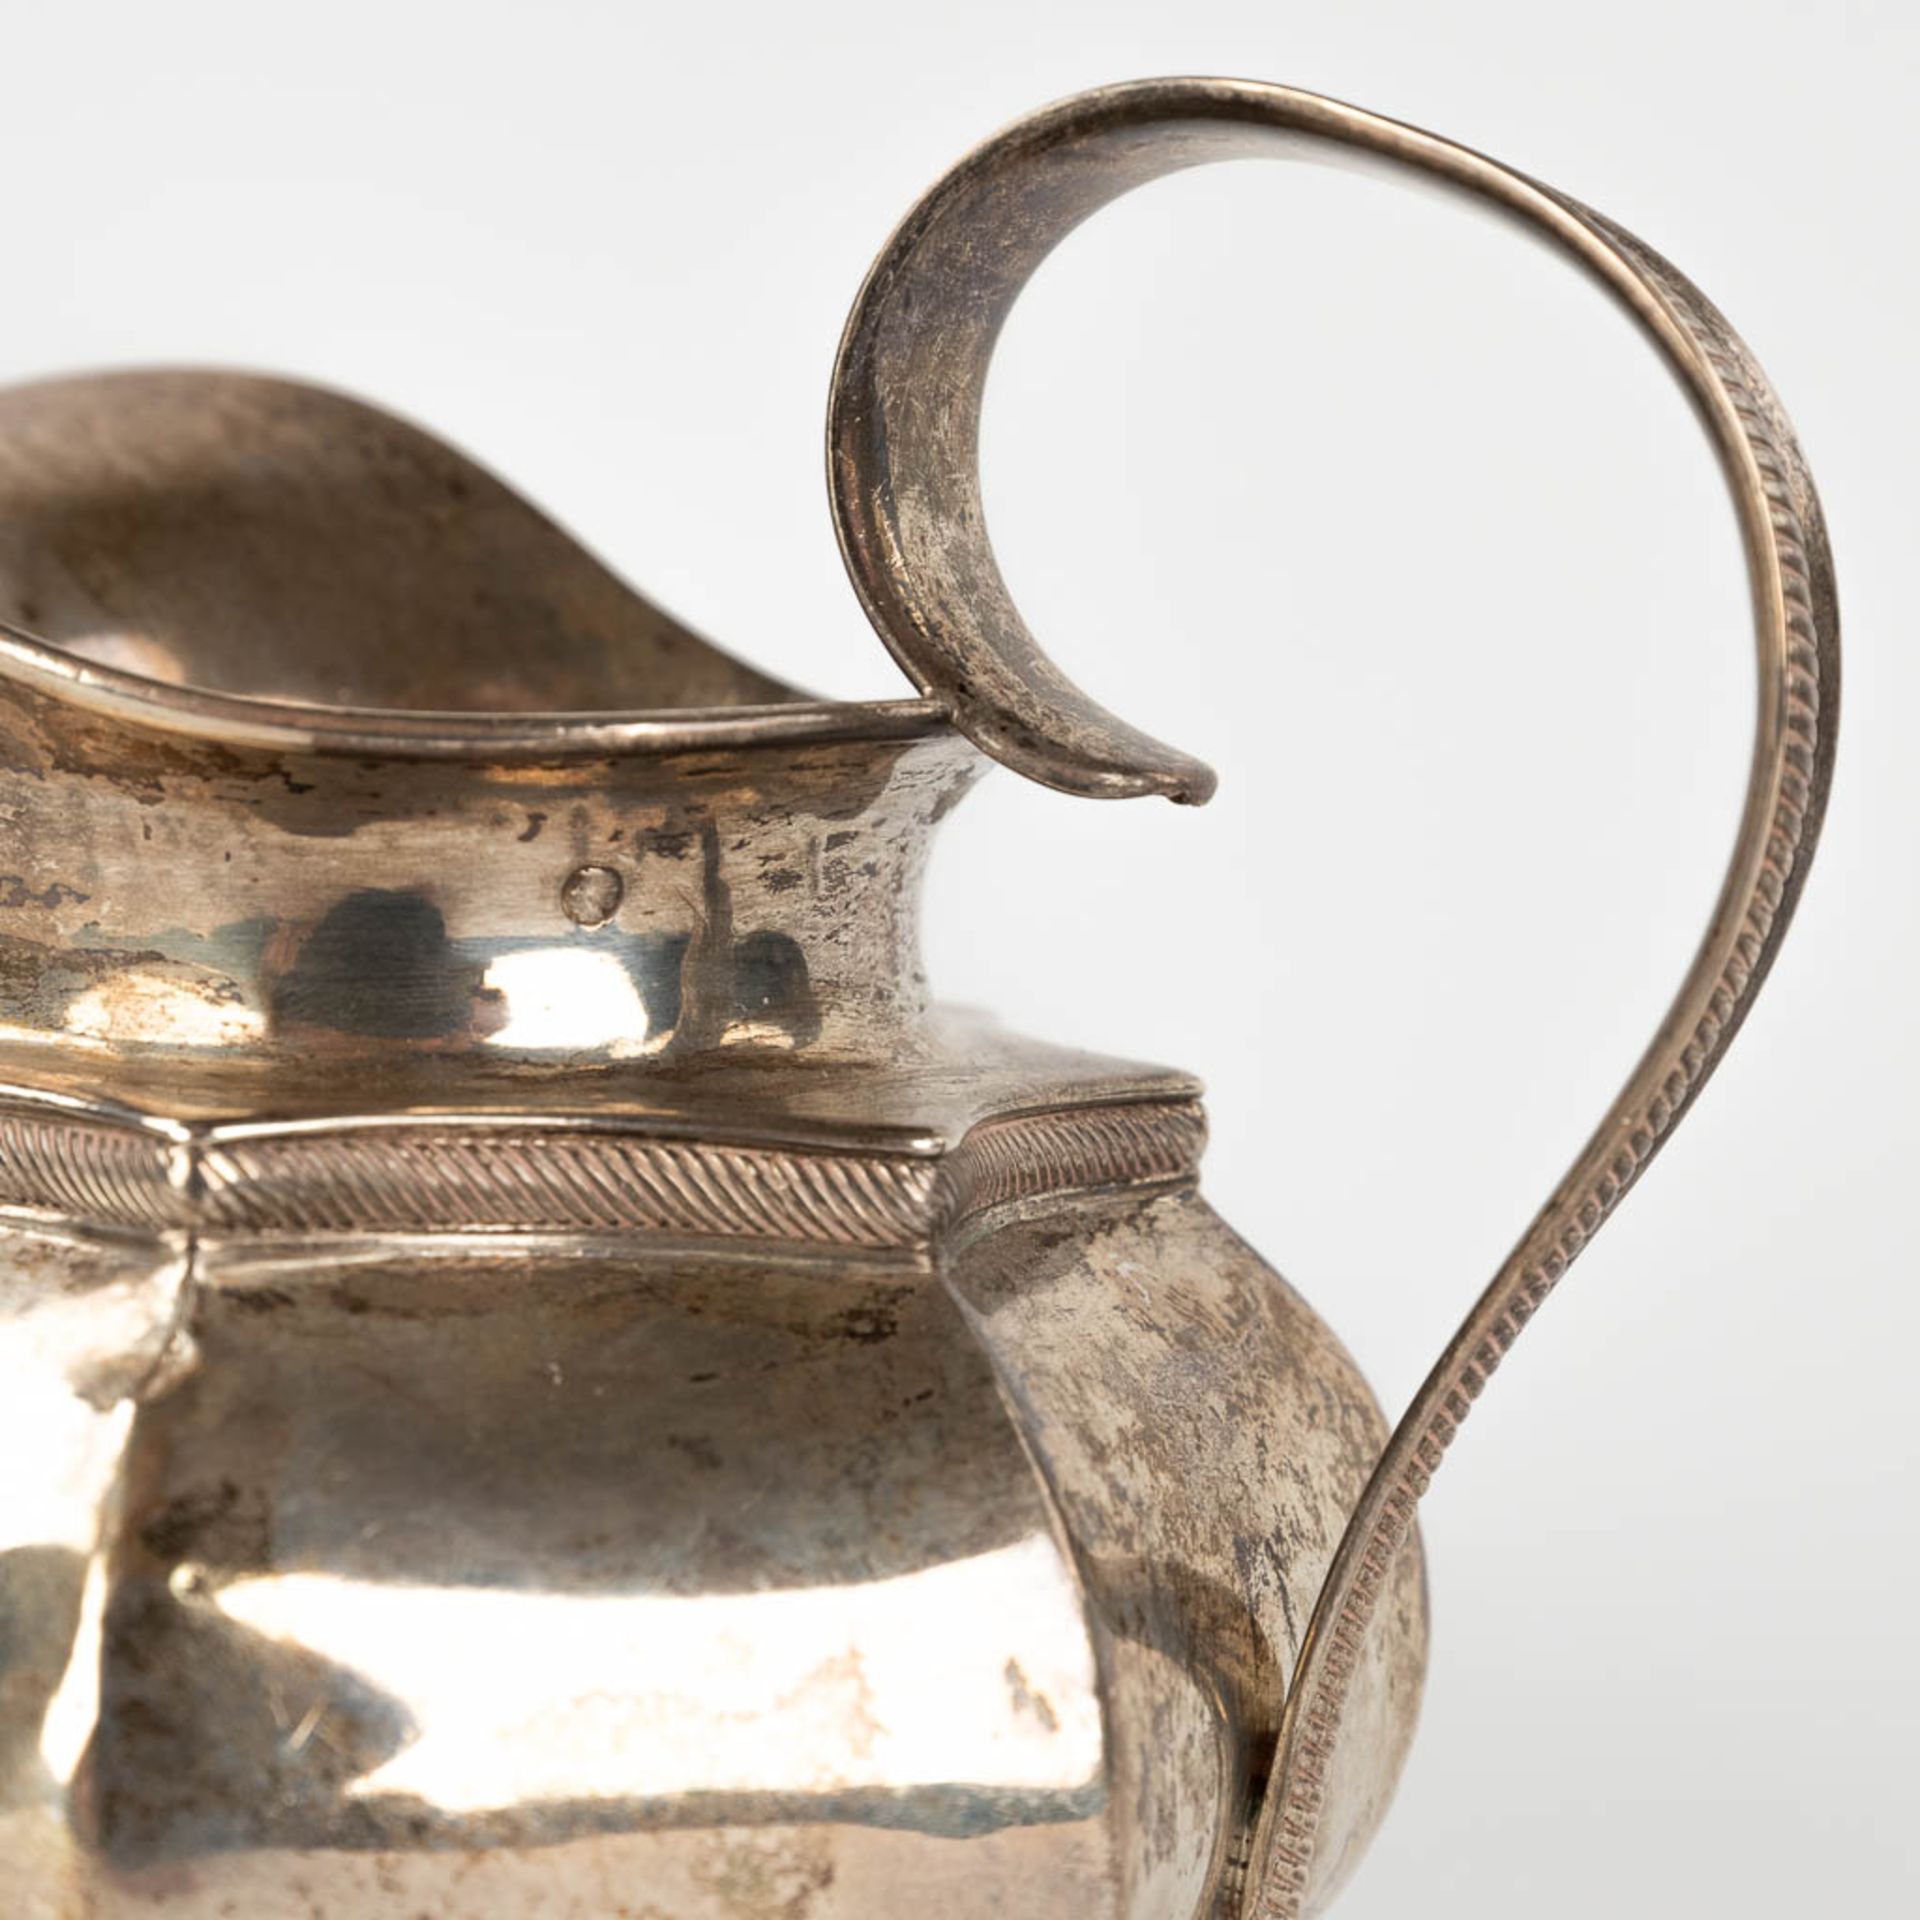 An antique milk jug, silver. The Netherlands, 19th C. 216g. (L: 10 x W: 12,5 x H: 12 cm) - Image 10 of 10